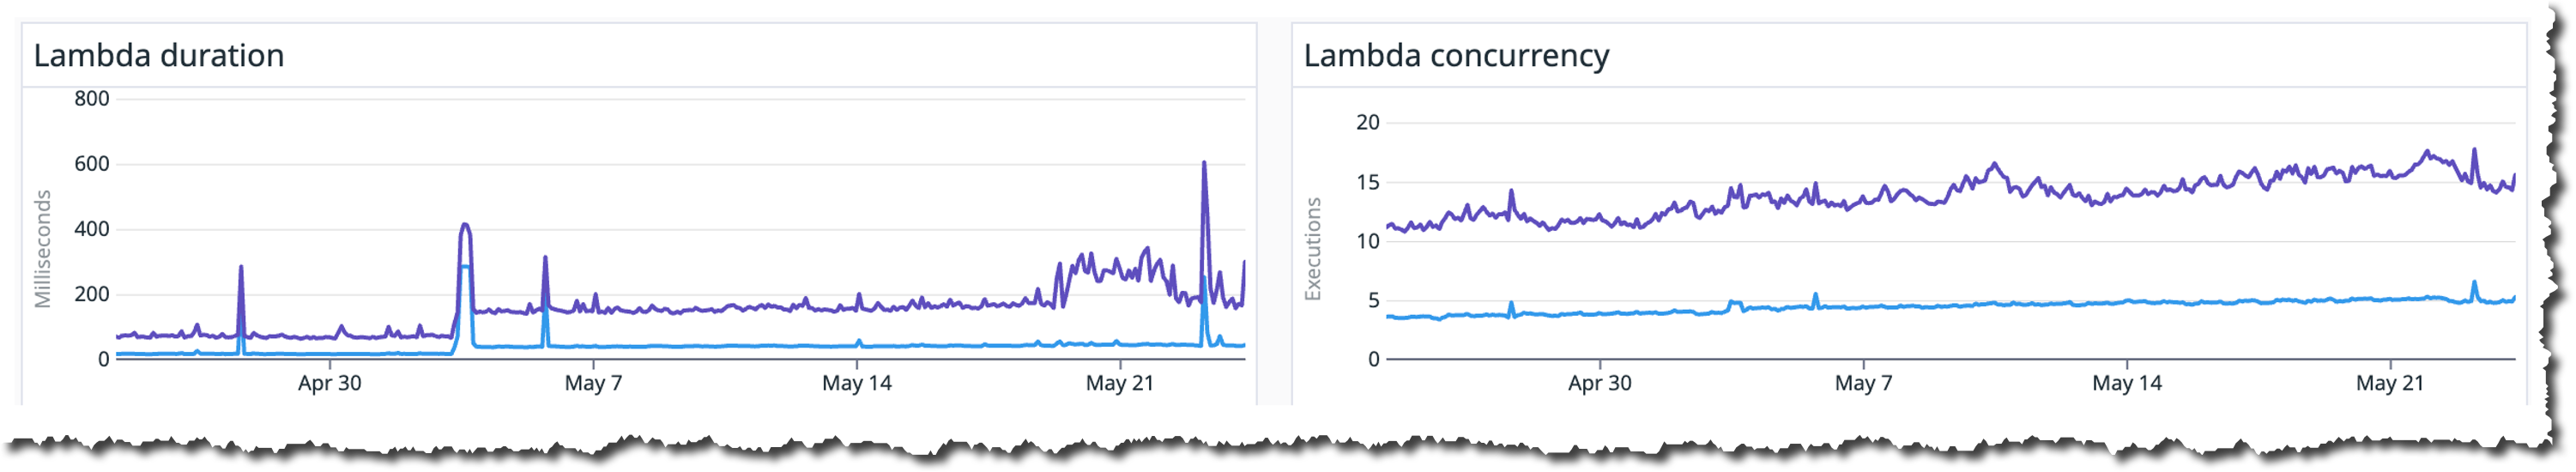 Lambda invocations and duration dashboard